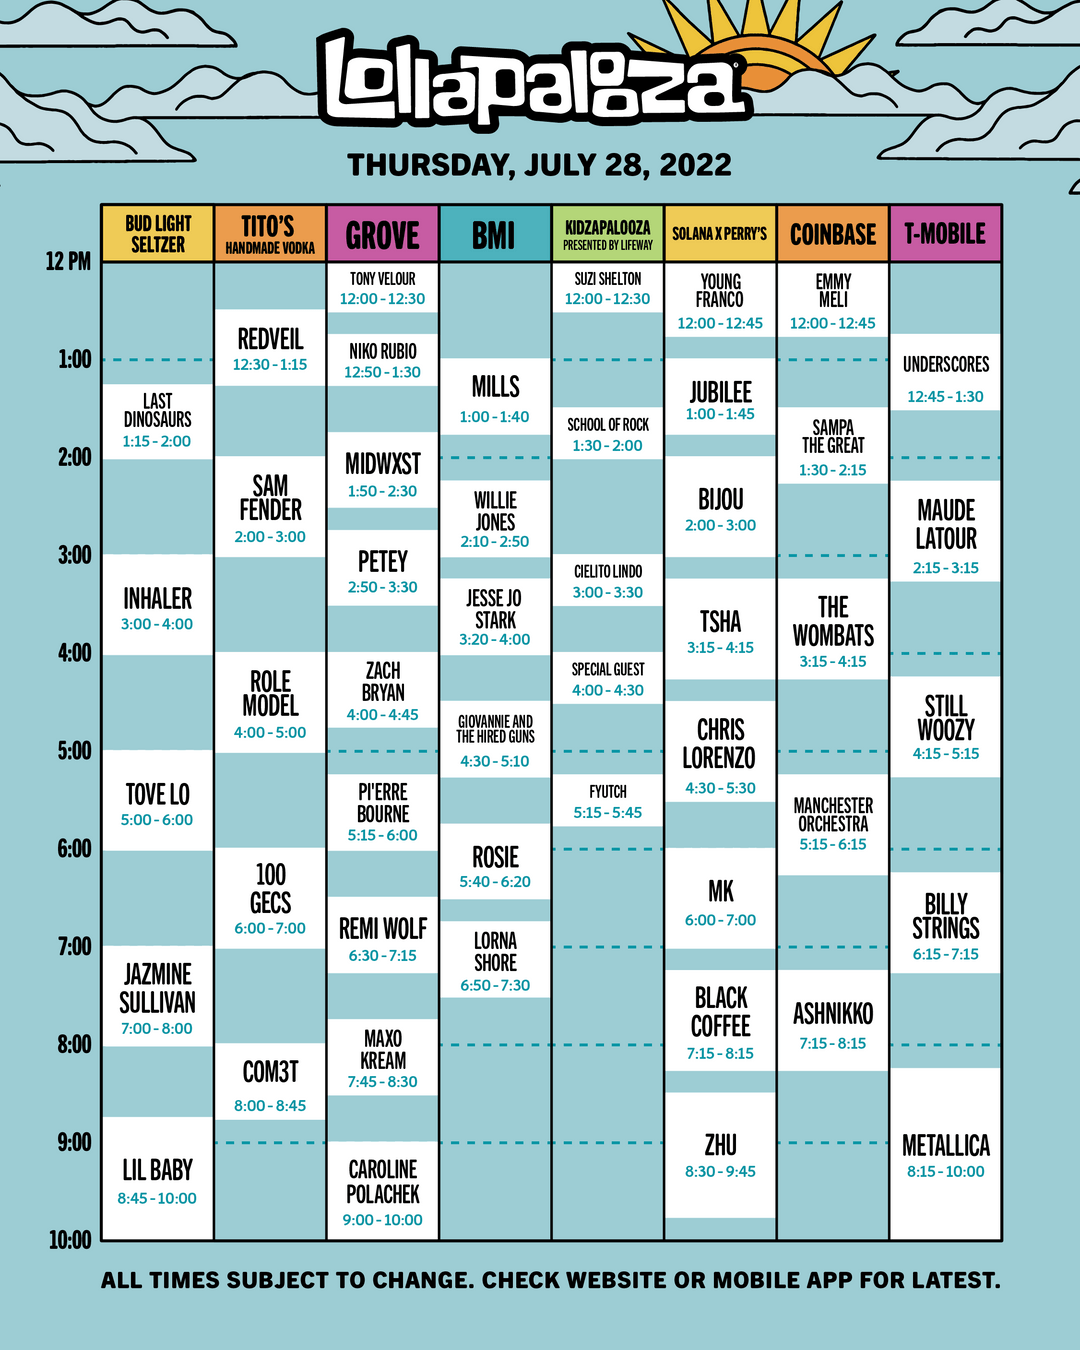 2022 Lollapalooza Schedule Announced 2